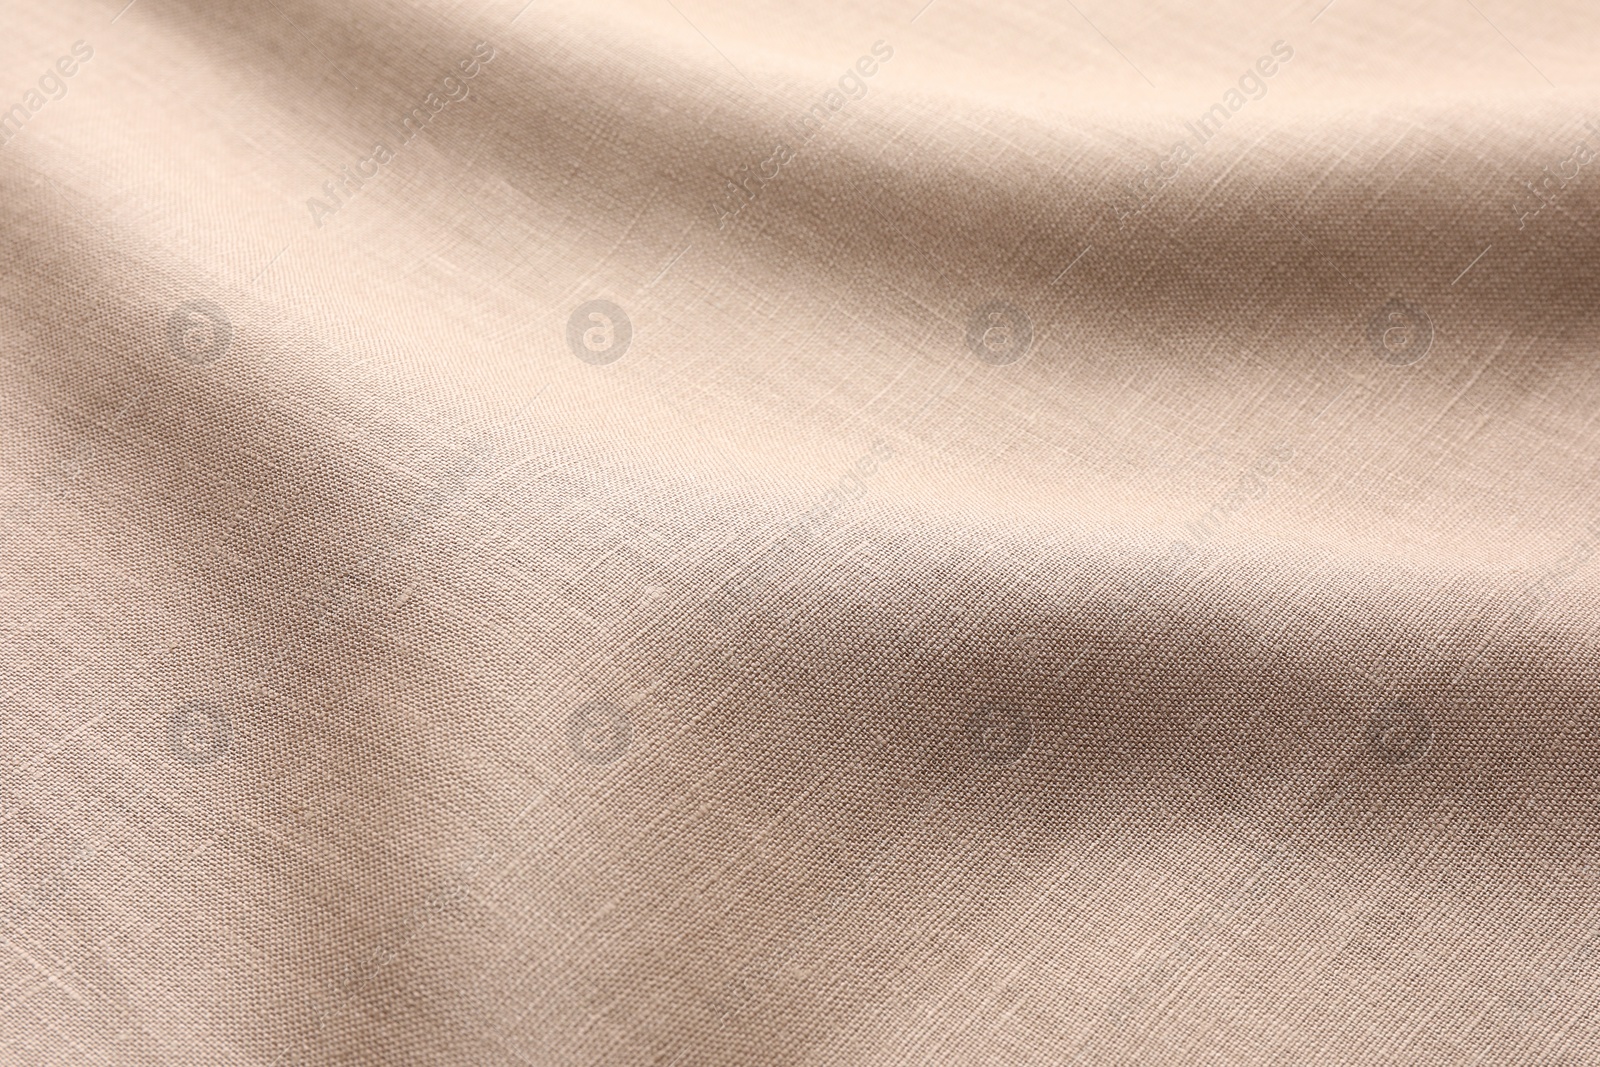 Photo of Texture of beige crumpled fabric as background, closeup